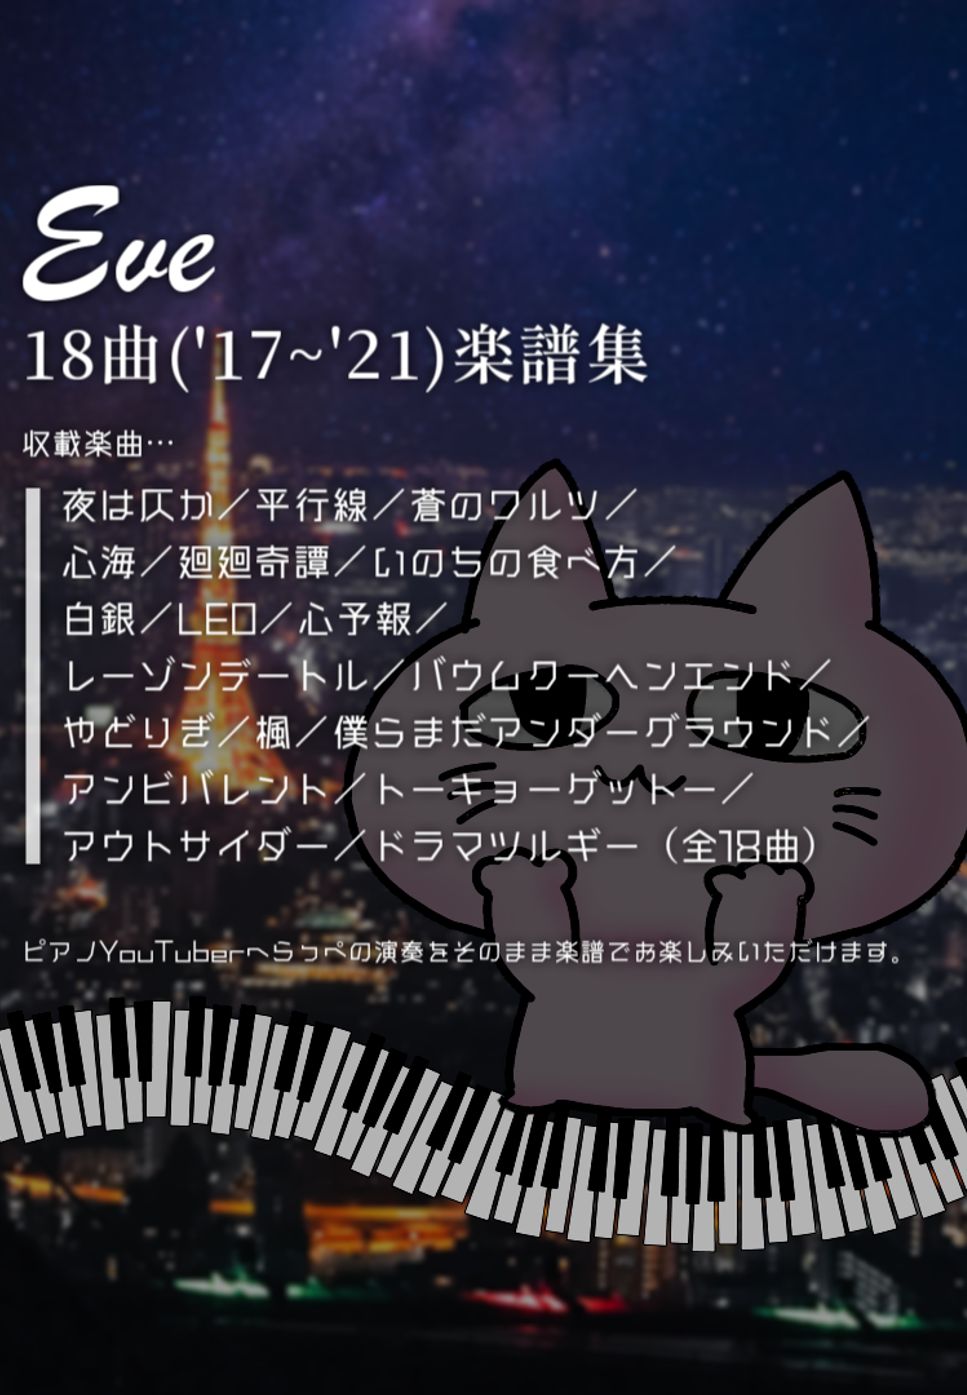 Eve - Eve18曲('17~'21)楽譜集 by へらっぺ